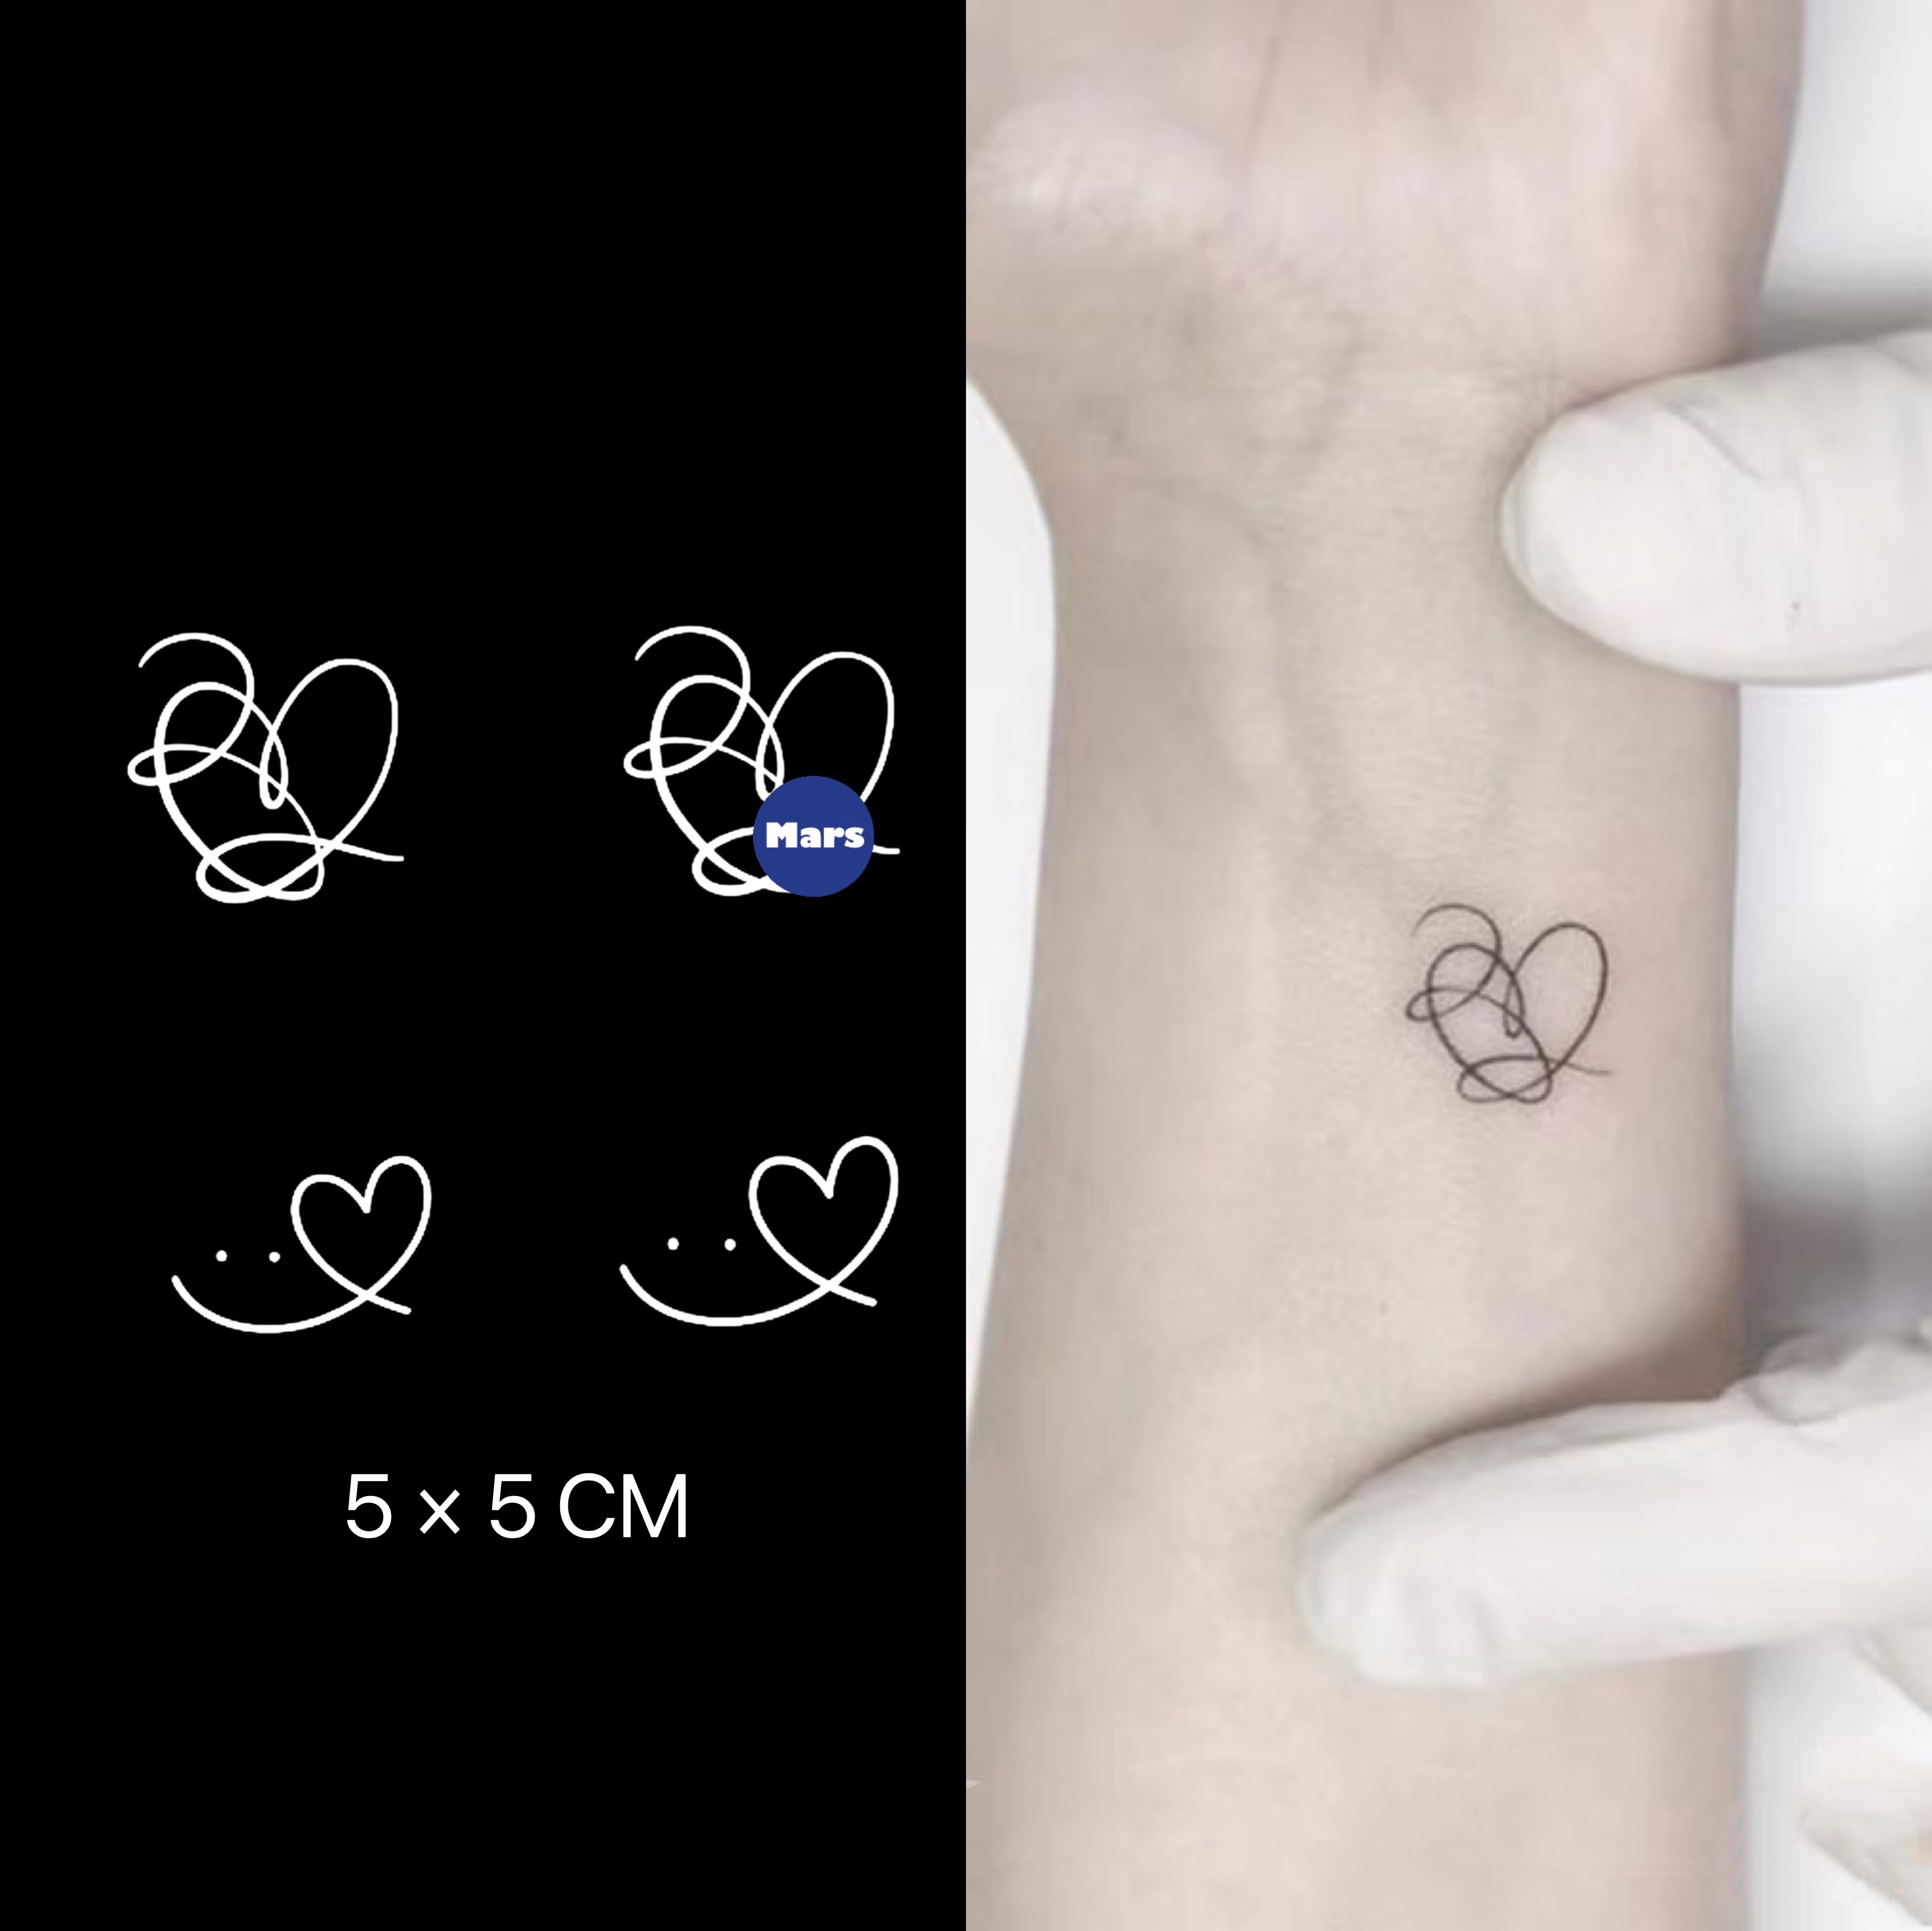 BTS x Inkbox release date and how to buy new temporary tattoo collection